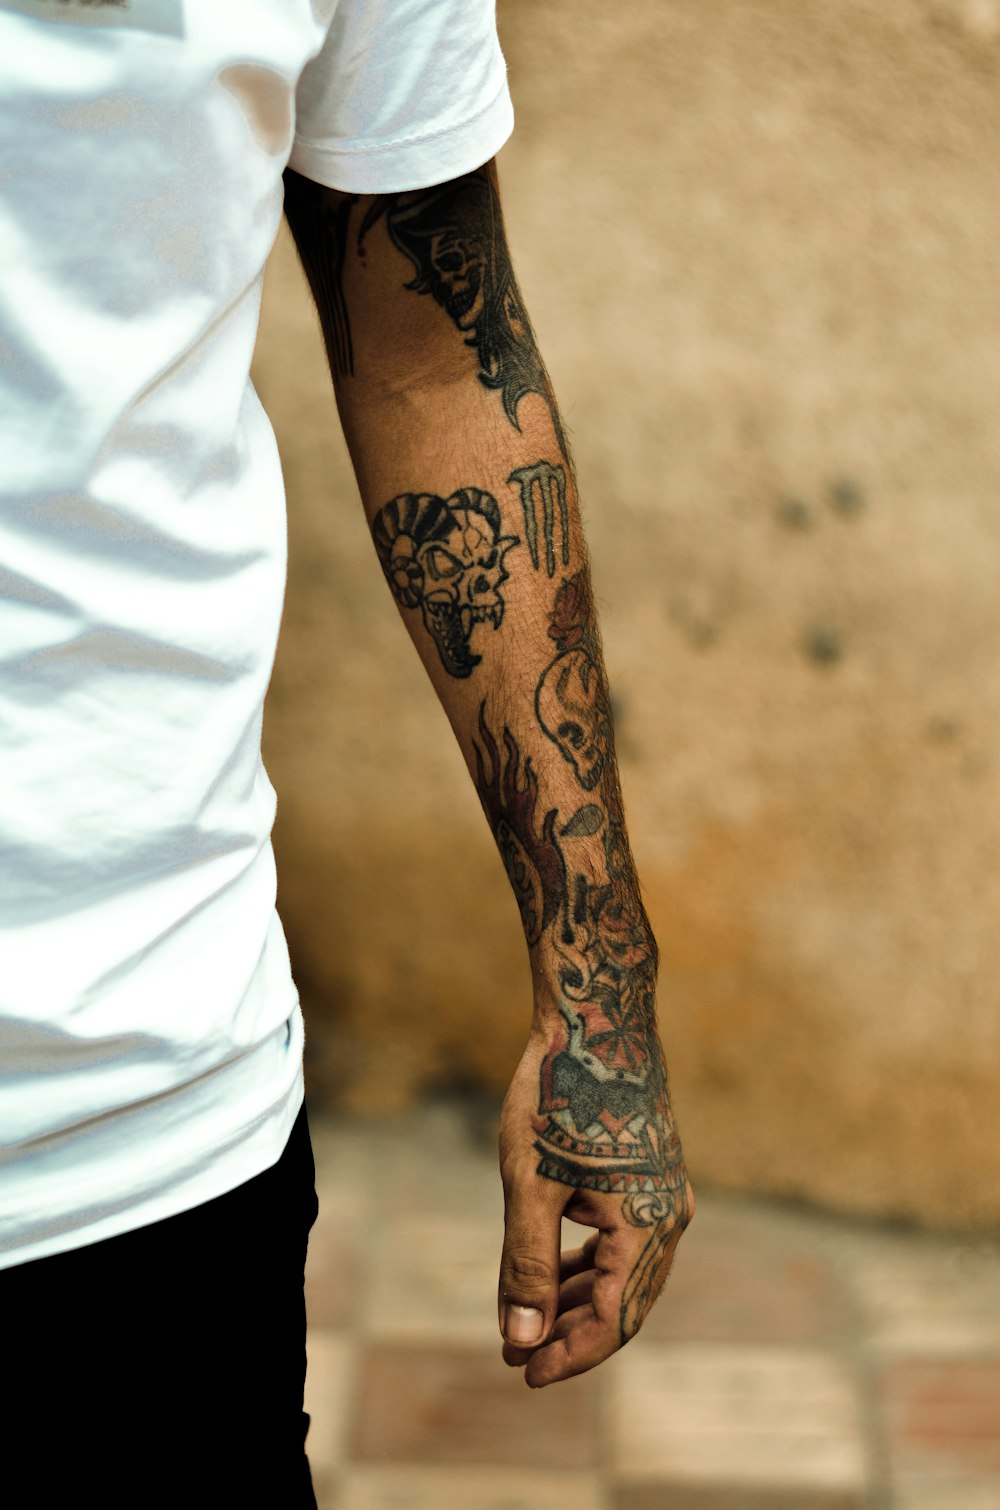 a person with tattoos on their arm